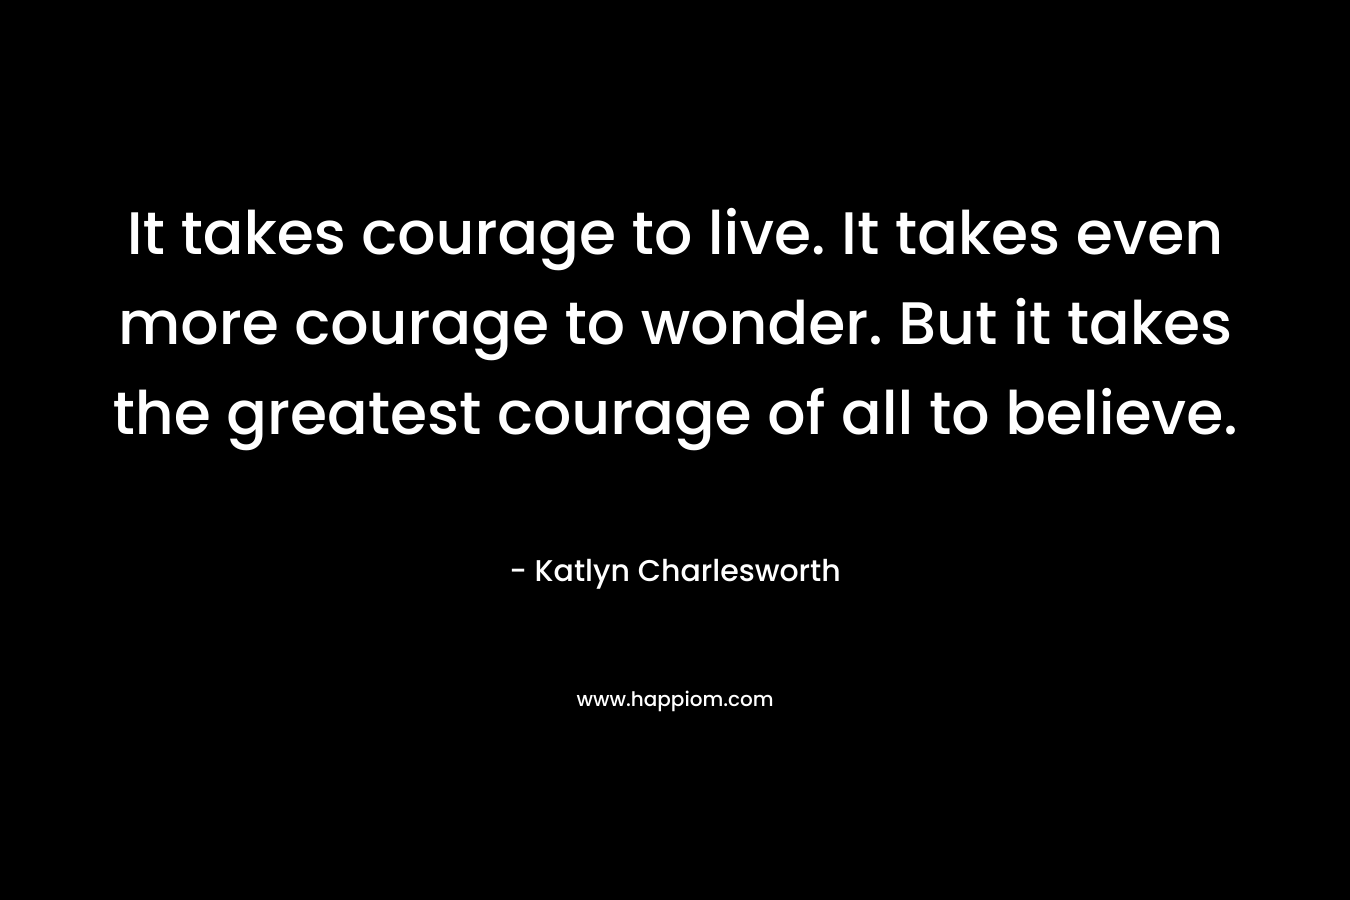 It takes courage to live. It takes even more courage to wonder. But it takes the greatest courage of all to believe.